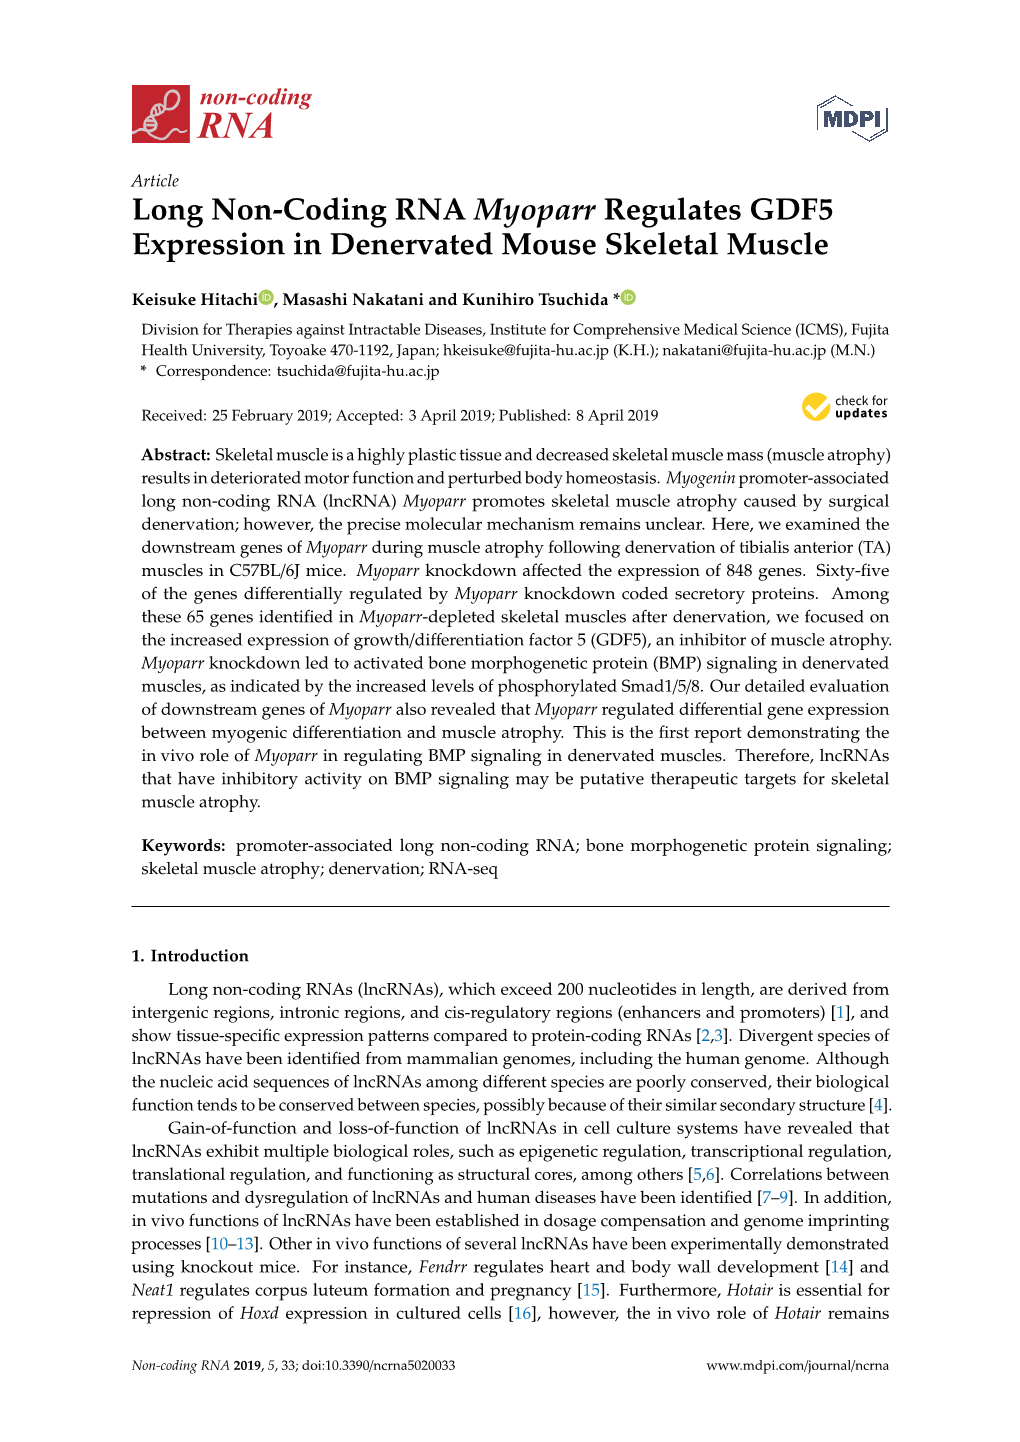 Long Non-Coding RNA Myoparr Regulates GDF5 Expression in Denervated Mouse Skeletal Muscle